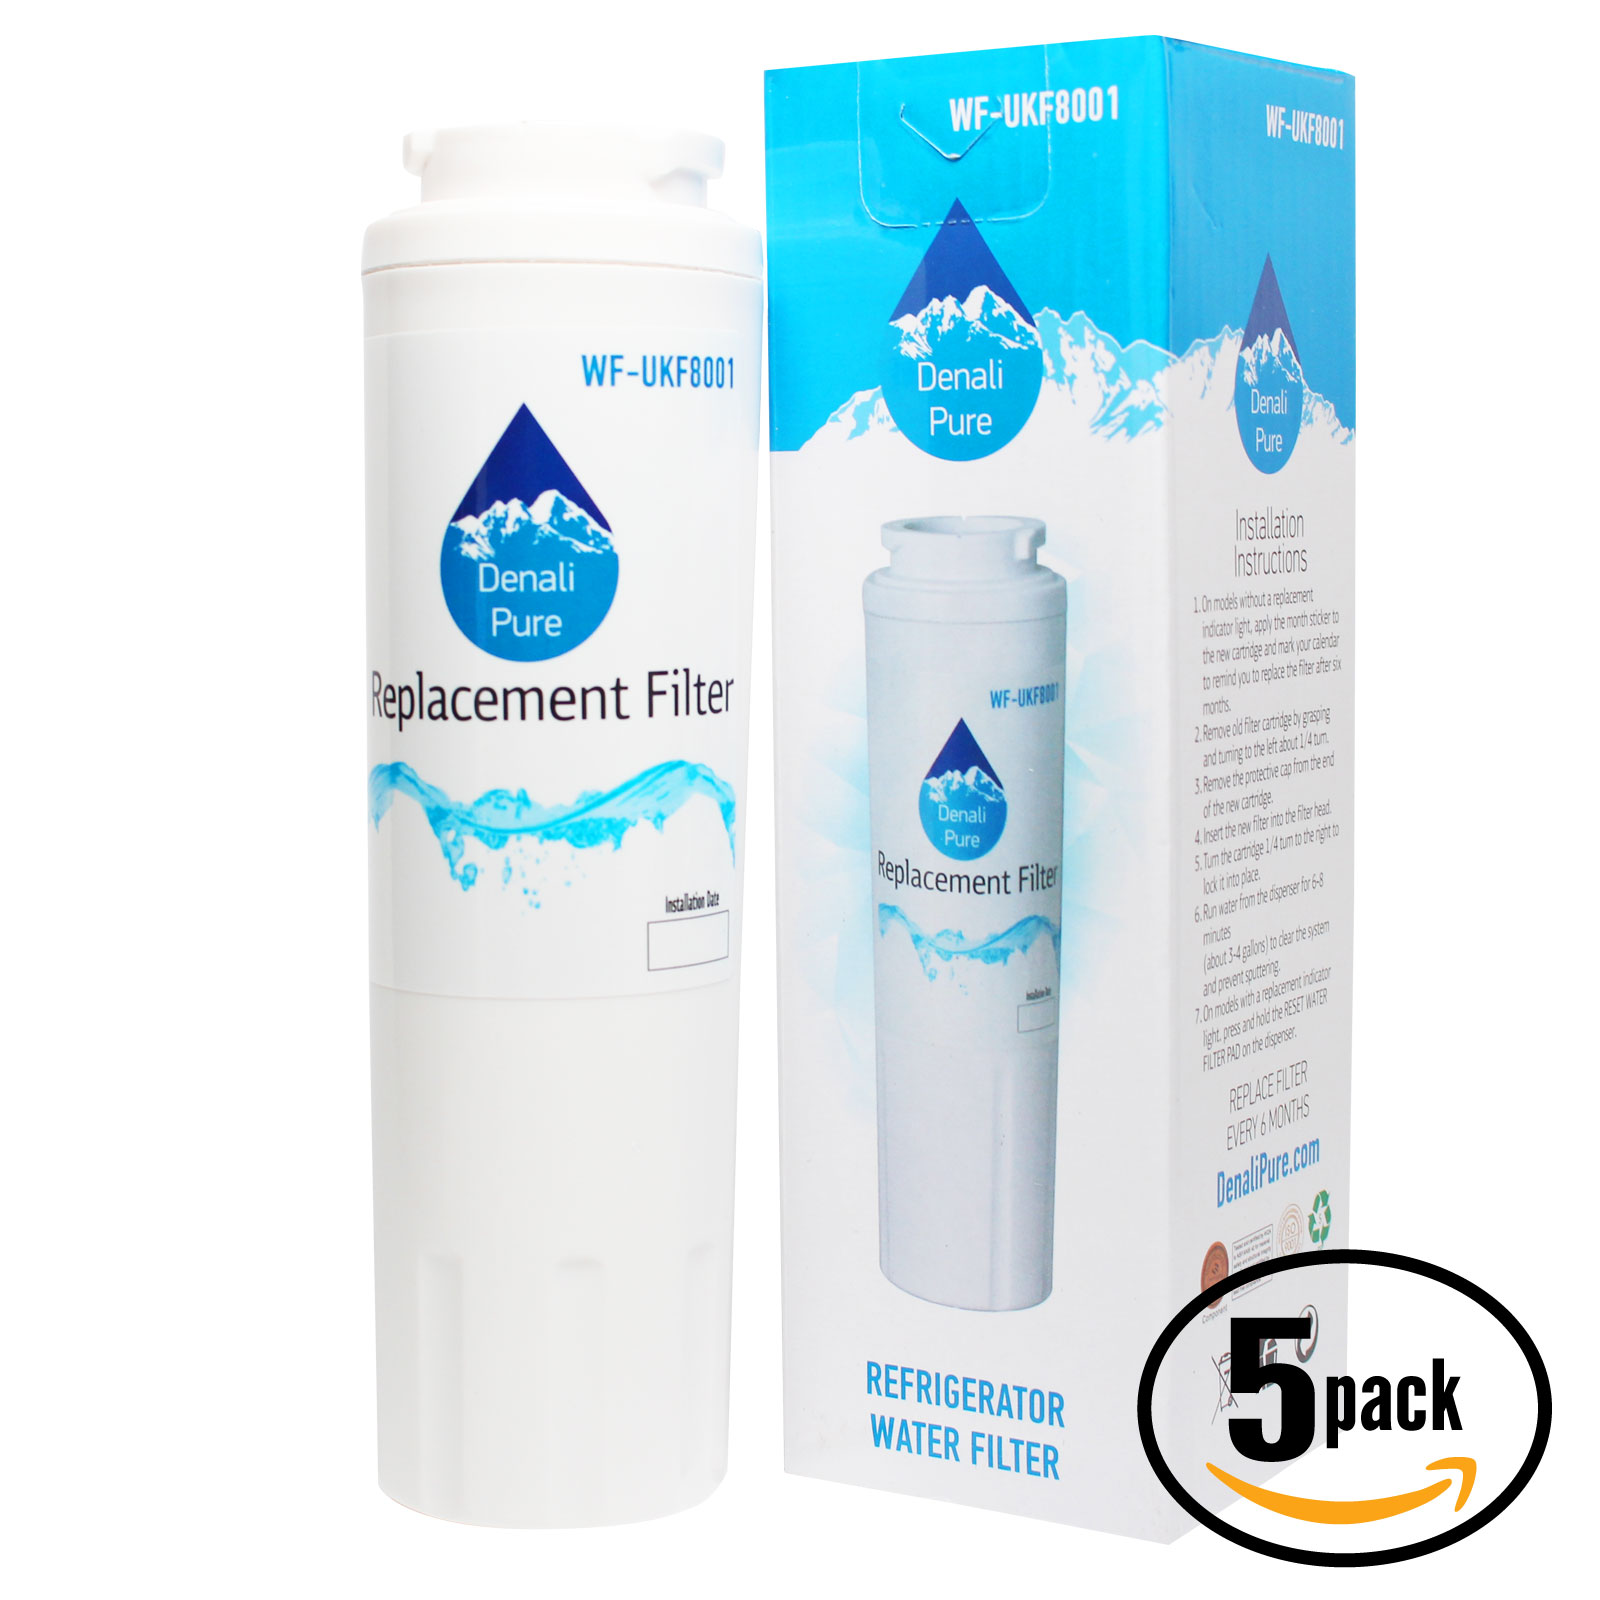 5-Pack Replacement for Maytag AFI2538AEW4 Refrigerator Water Filter - Compatible with Maytag UKF8001 Fridge Water Filter Cartridge - image 1 of 4